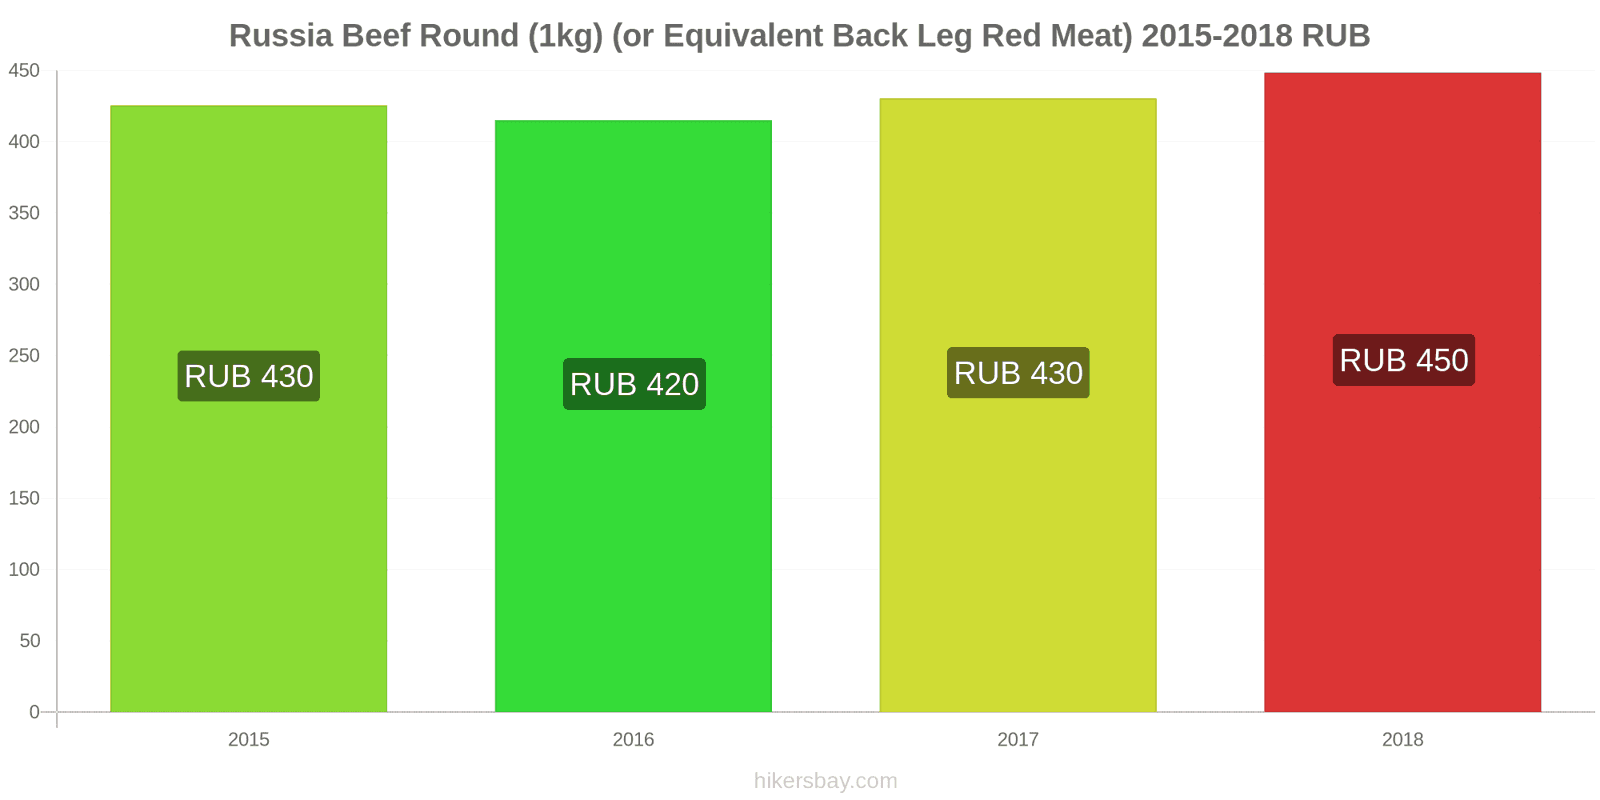 Russia price changes Beef (1kg) (or similar red meat) hikersbay.com